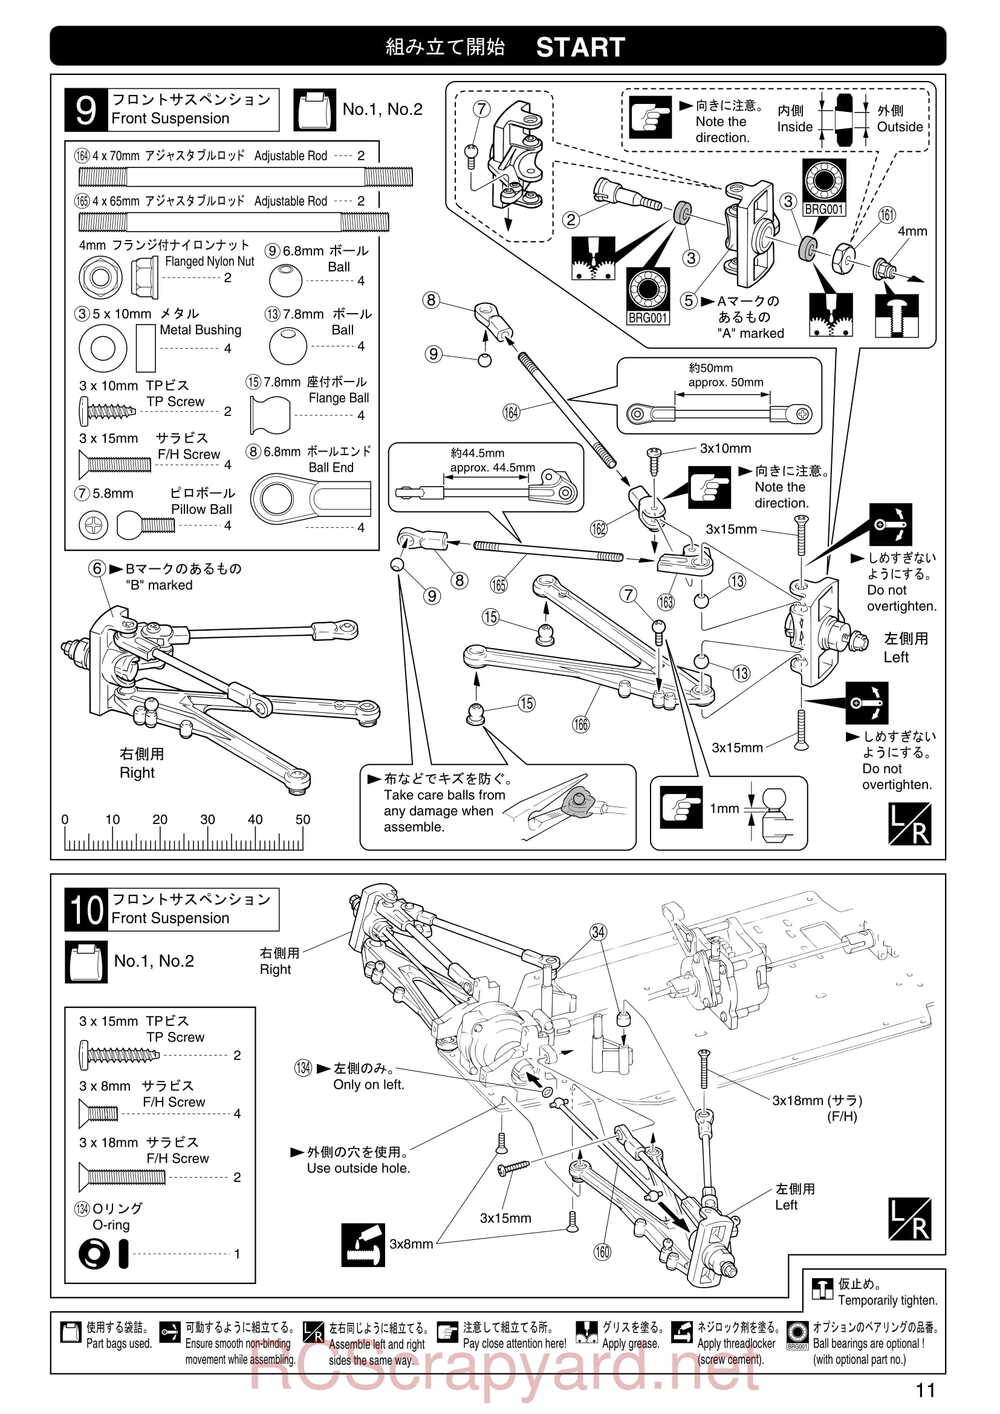 Kyosho - 31213 - TR-15 Monster-Touring - Manual - Page 11